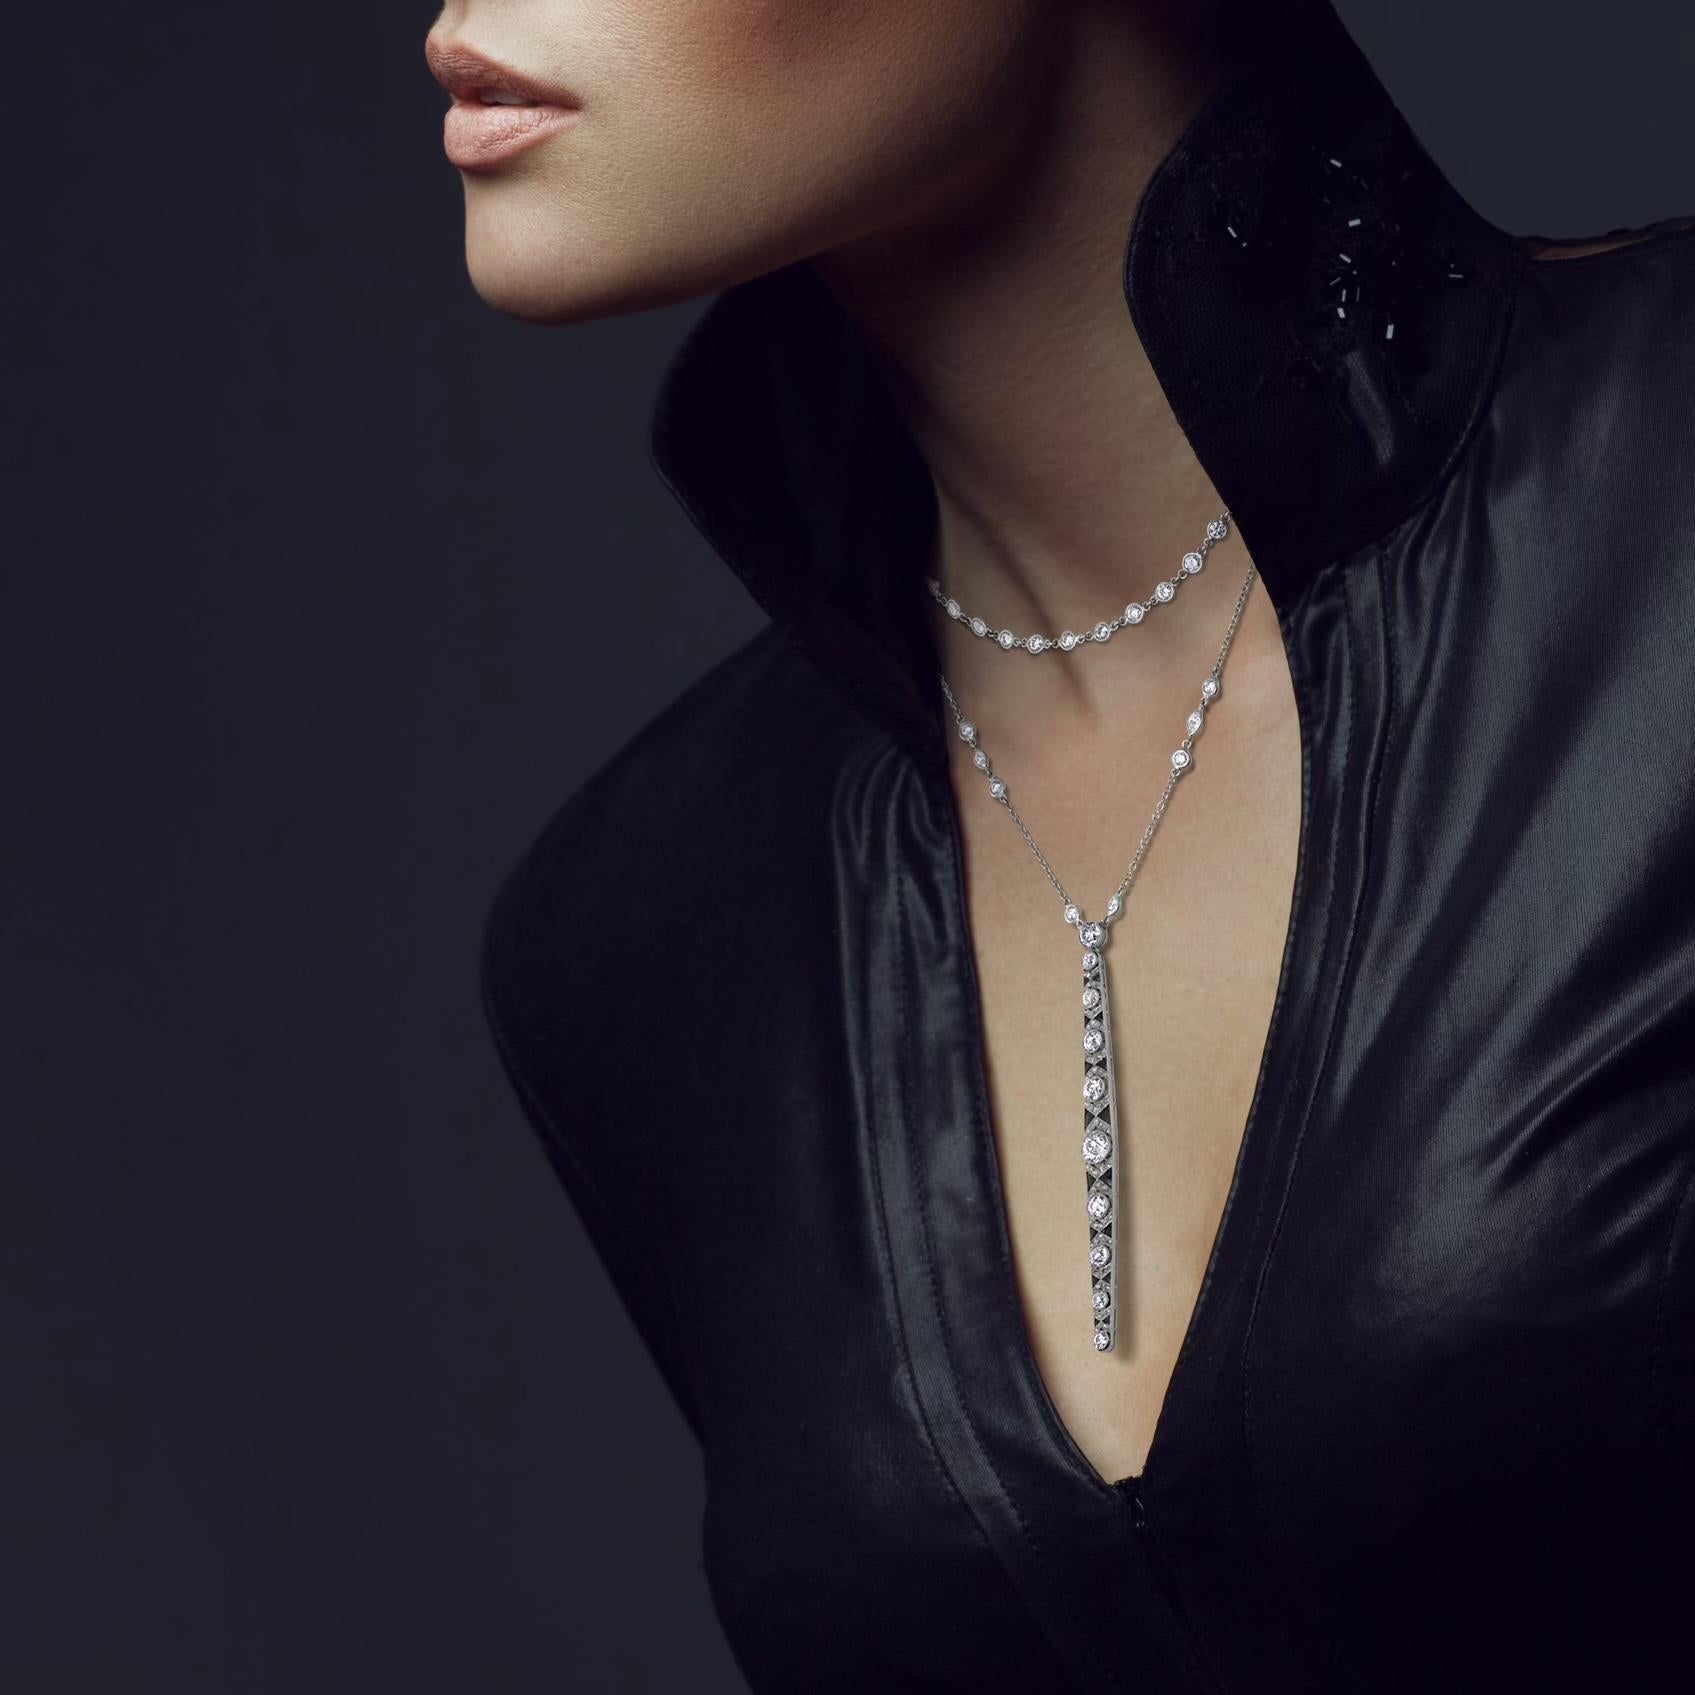 Derived from the Art Deco period. This diamond onyx necklace is one of a kind & part of the MMNY Reconceived collection. An original high diamond carat weight bar pin has been updated for contemporary wear with the craftsmanship & integrity of the